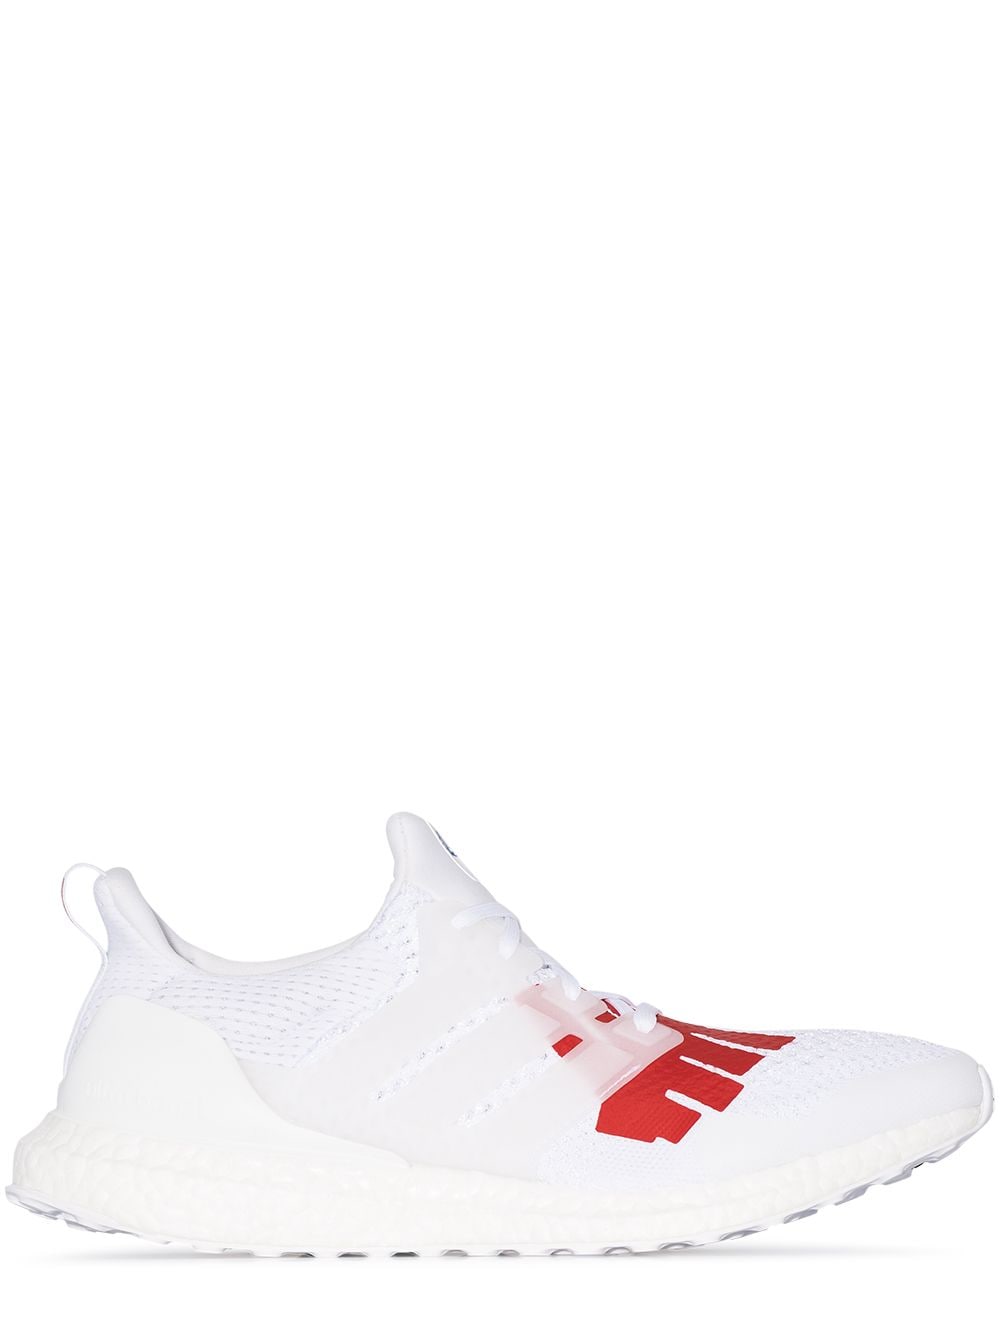 adidas x Undefeated Ultraboost sneakers - White von adidas